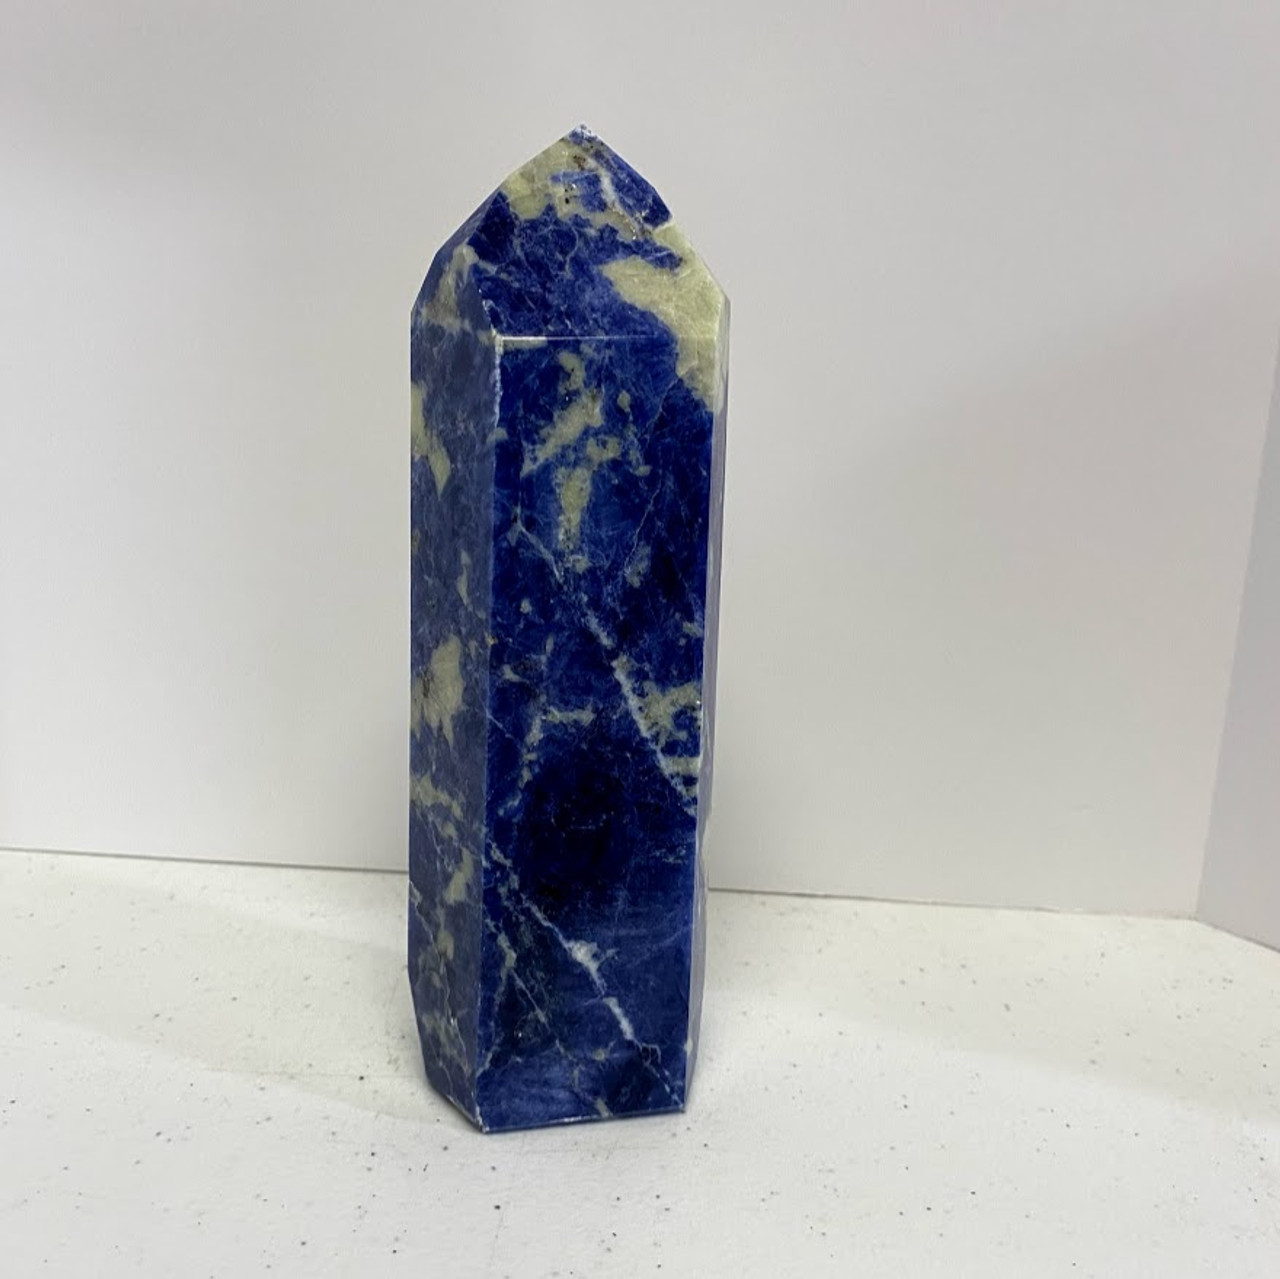 Sodalite Tower 6 Sided